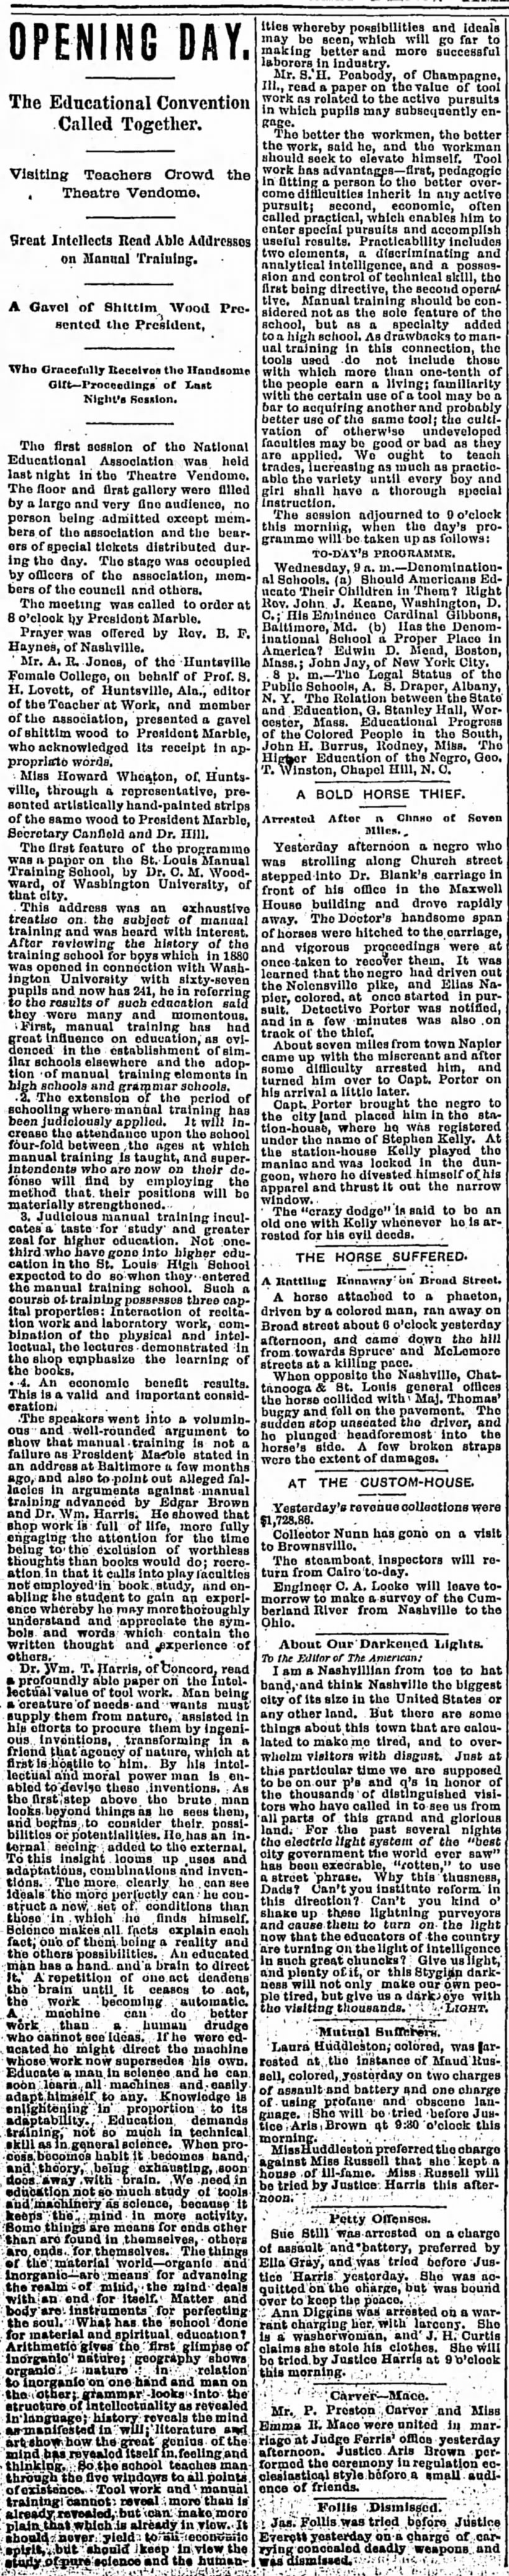 Opening Day. The Tennessean (Nashville, Tennessee) June 17, 1889, page 10